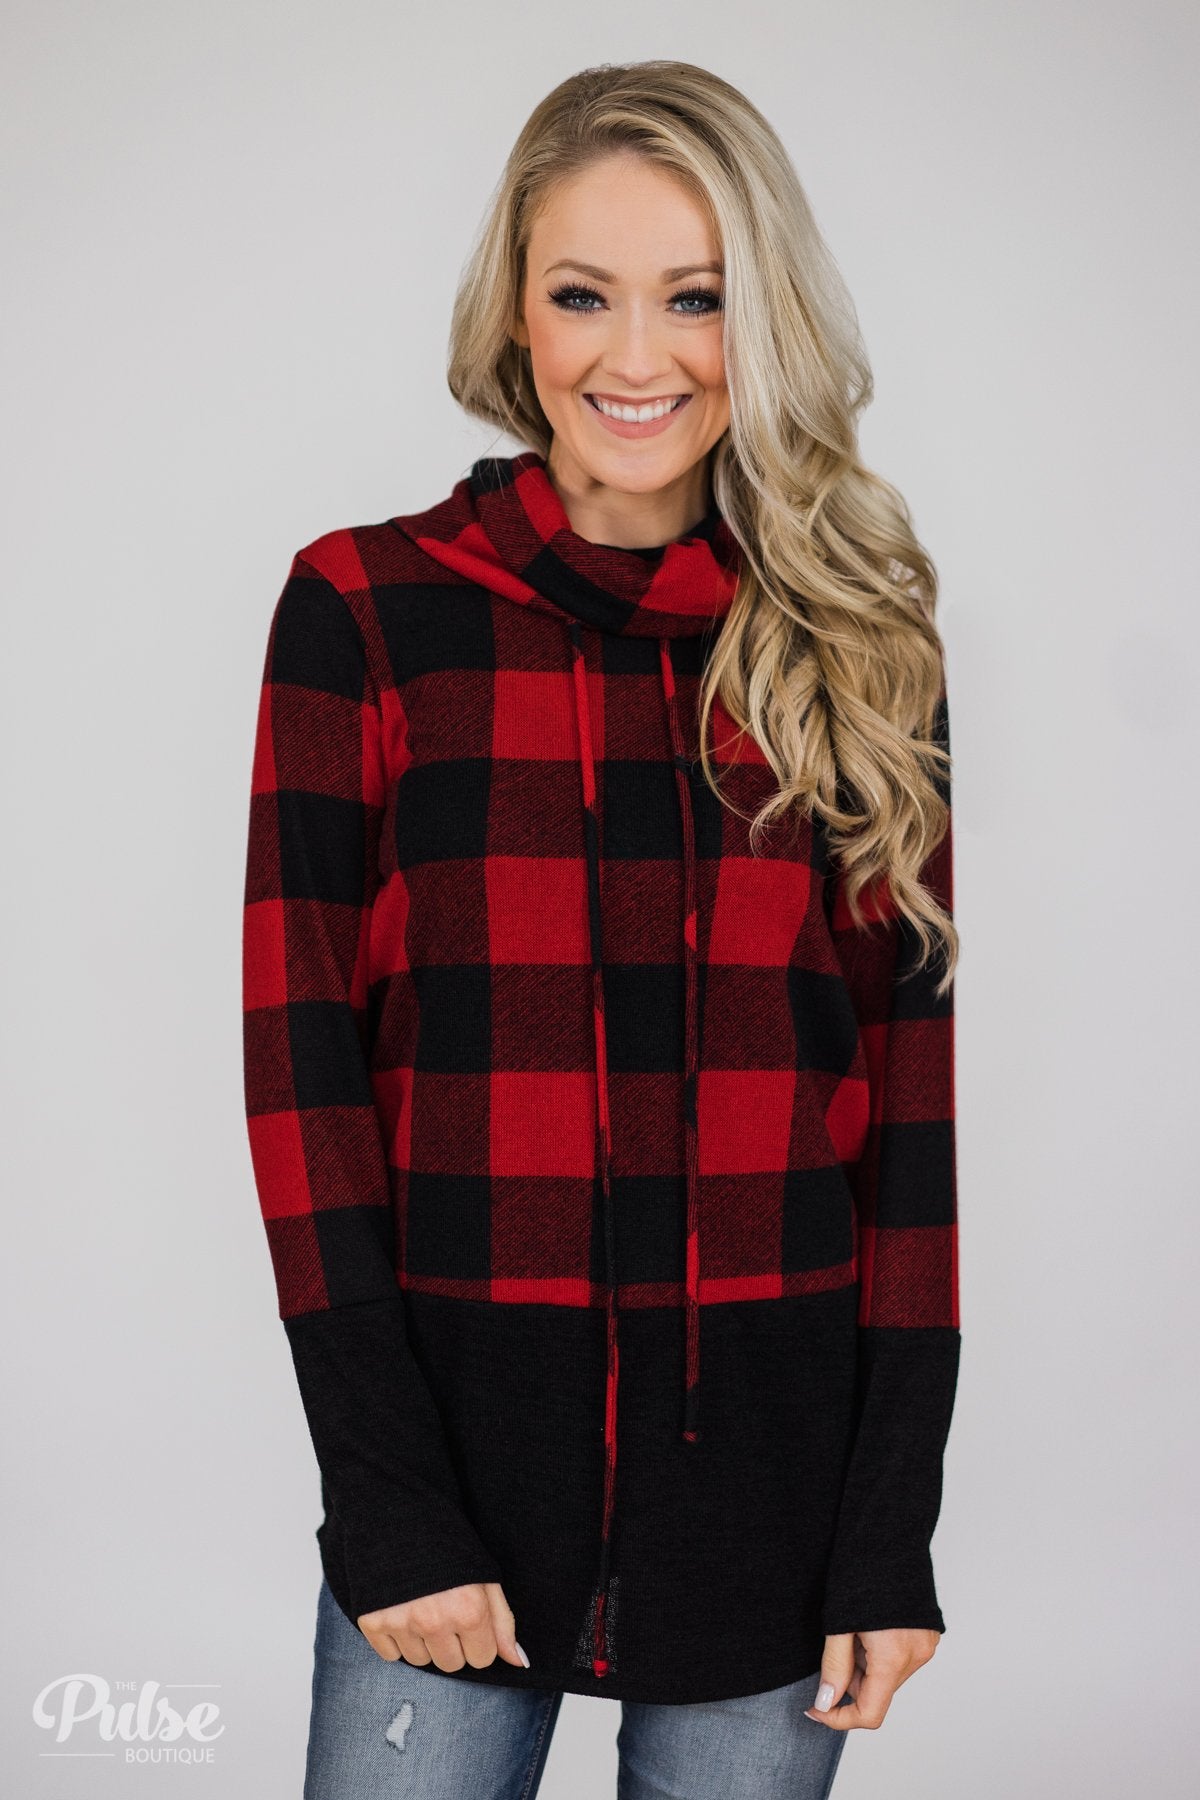 Can't Say No Buffalo Plaid Cowl Neck Top – The Pulse Boutique